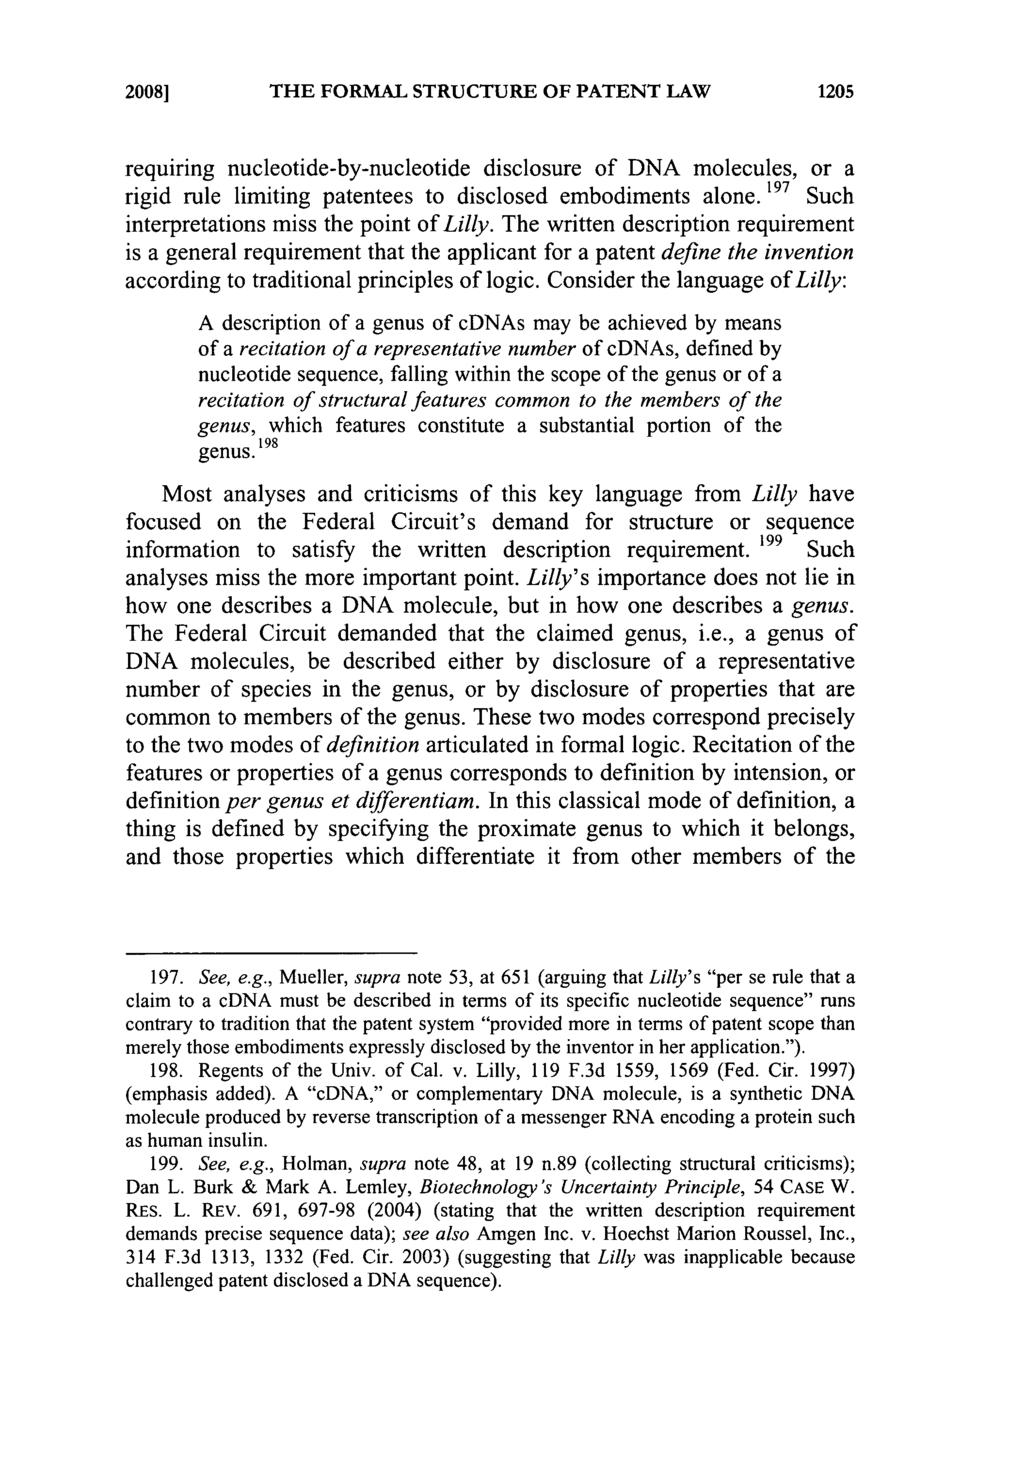 2008] THE FORMAL STRUCTURE OF PATENT LAW requiring nucleotide-by-nucleotide disclosure of DNA molecules, or a rigid rule limiting patentees to disclosed embodiments alone.